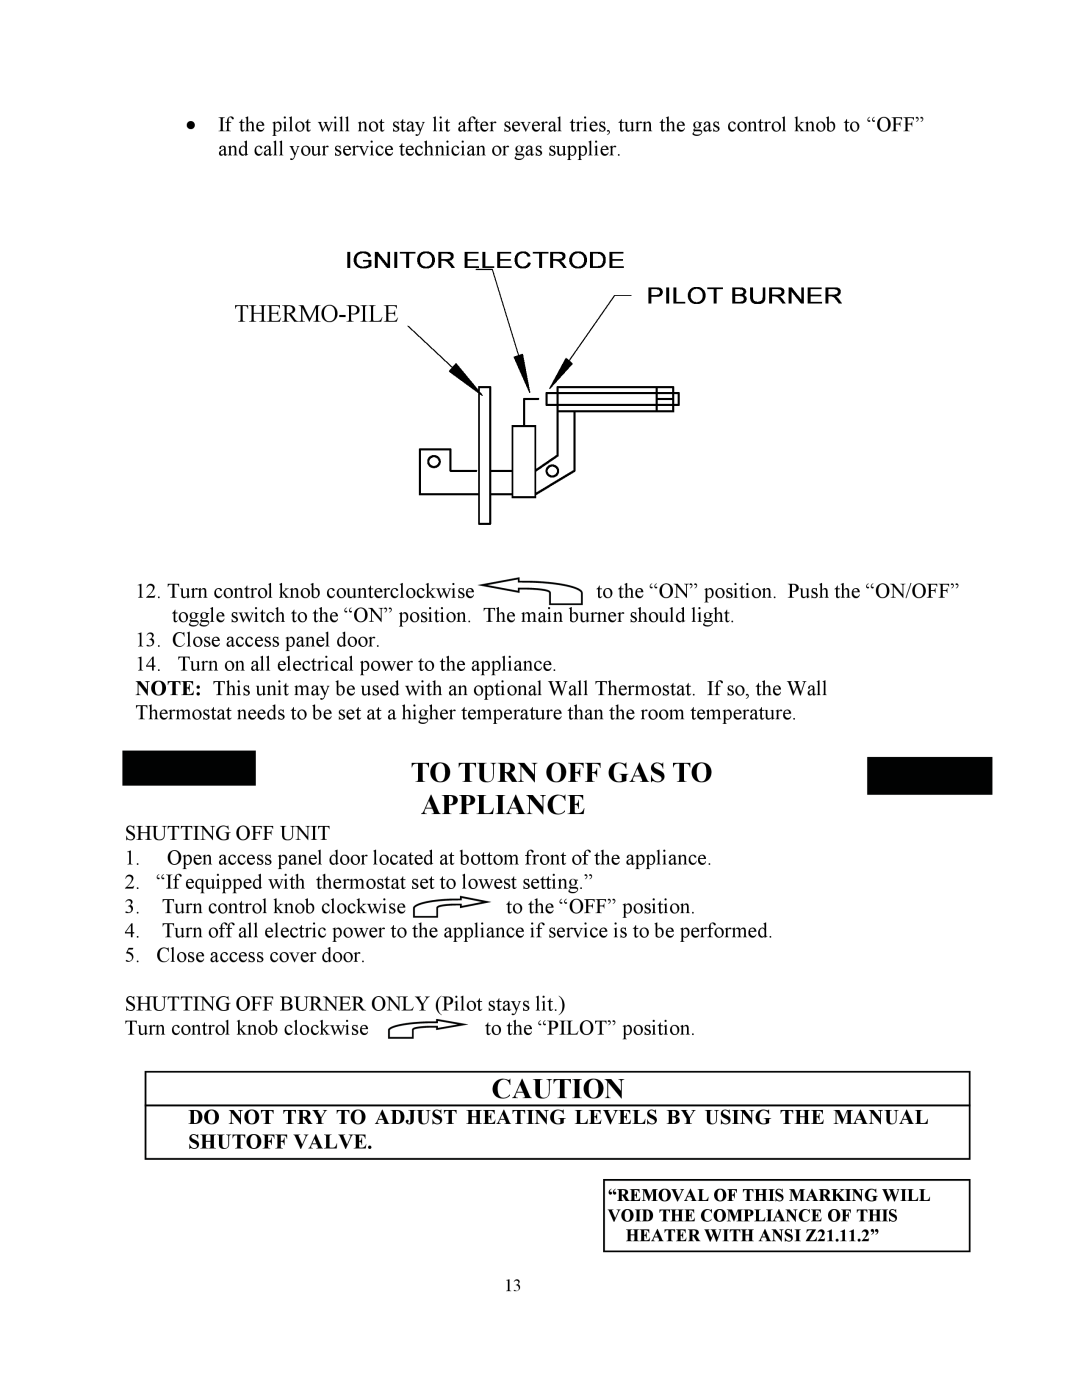 New Buck Corporation 34 manual To Turn Off Gas To Appliance, Ignitor Electrode, Pilot Burner 